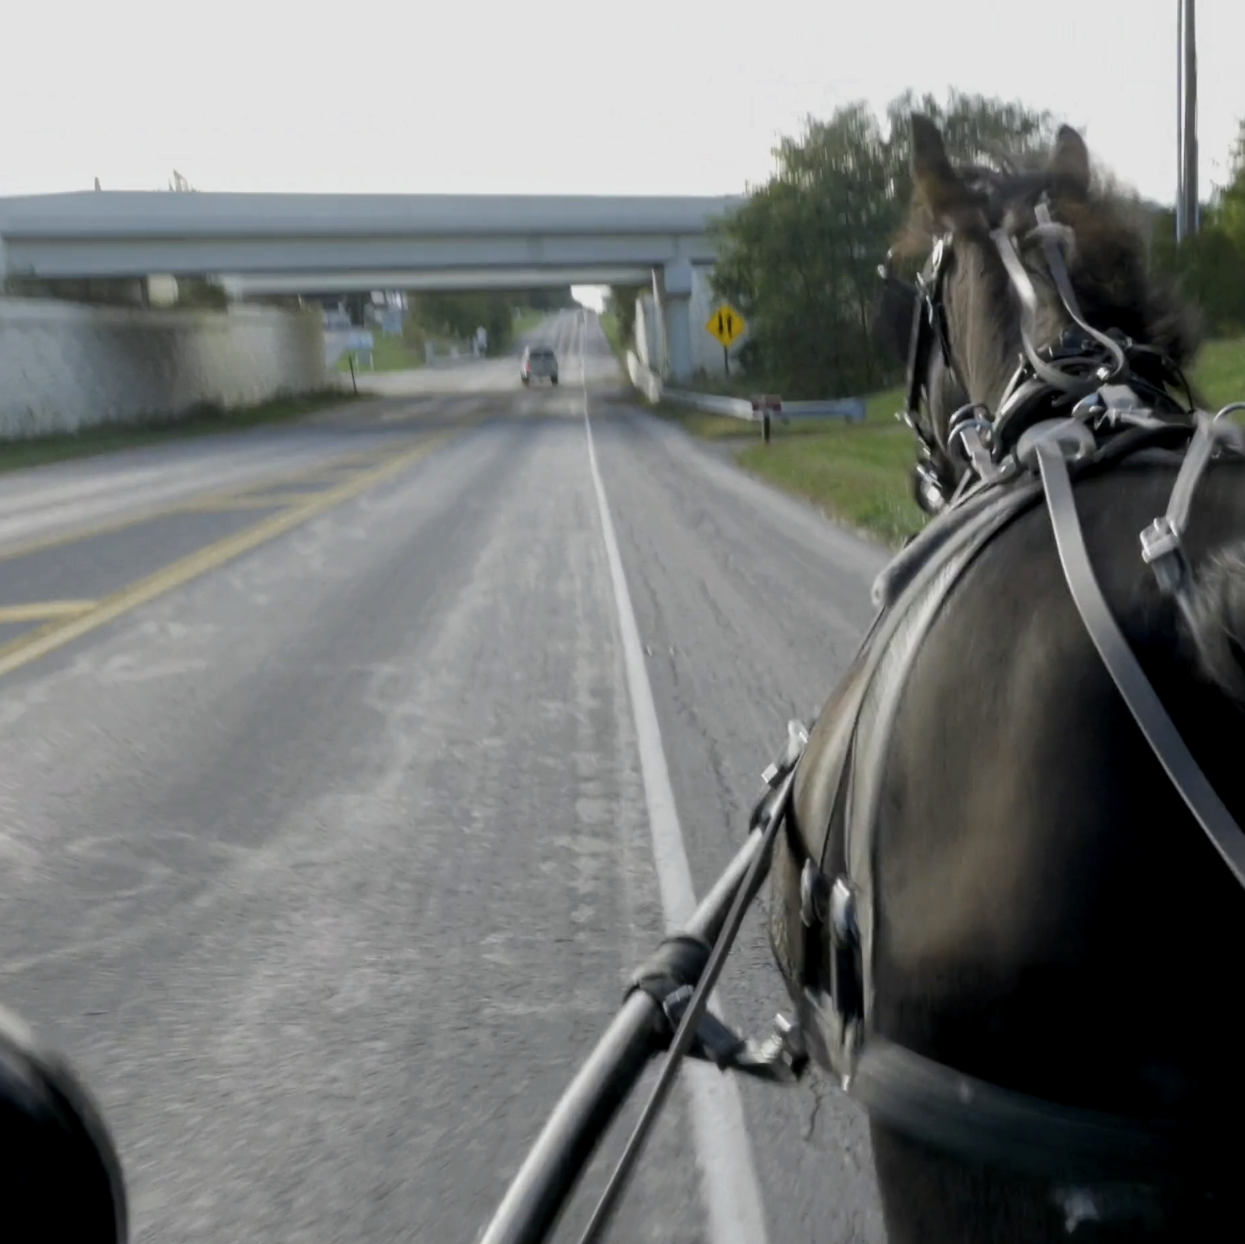 Driving a horse & buggy down the road is a terrifying experience, in my opinion!